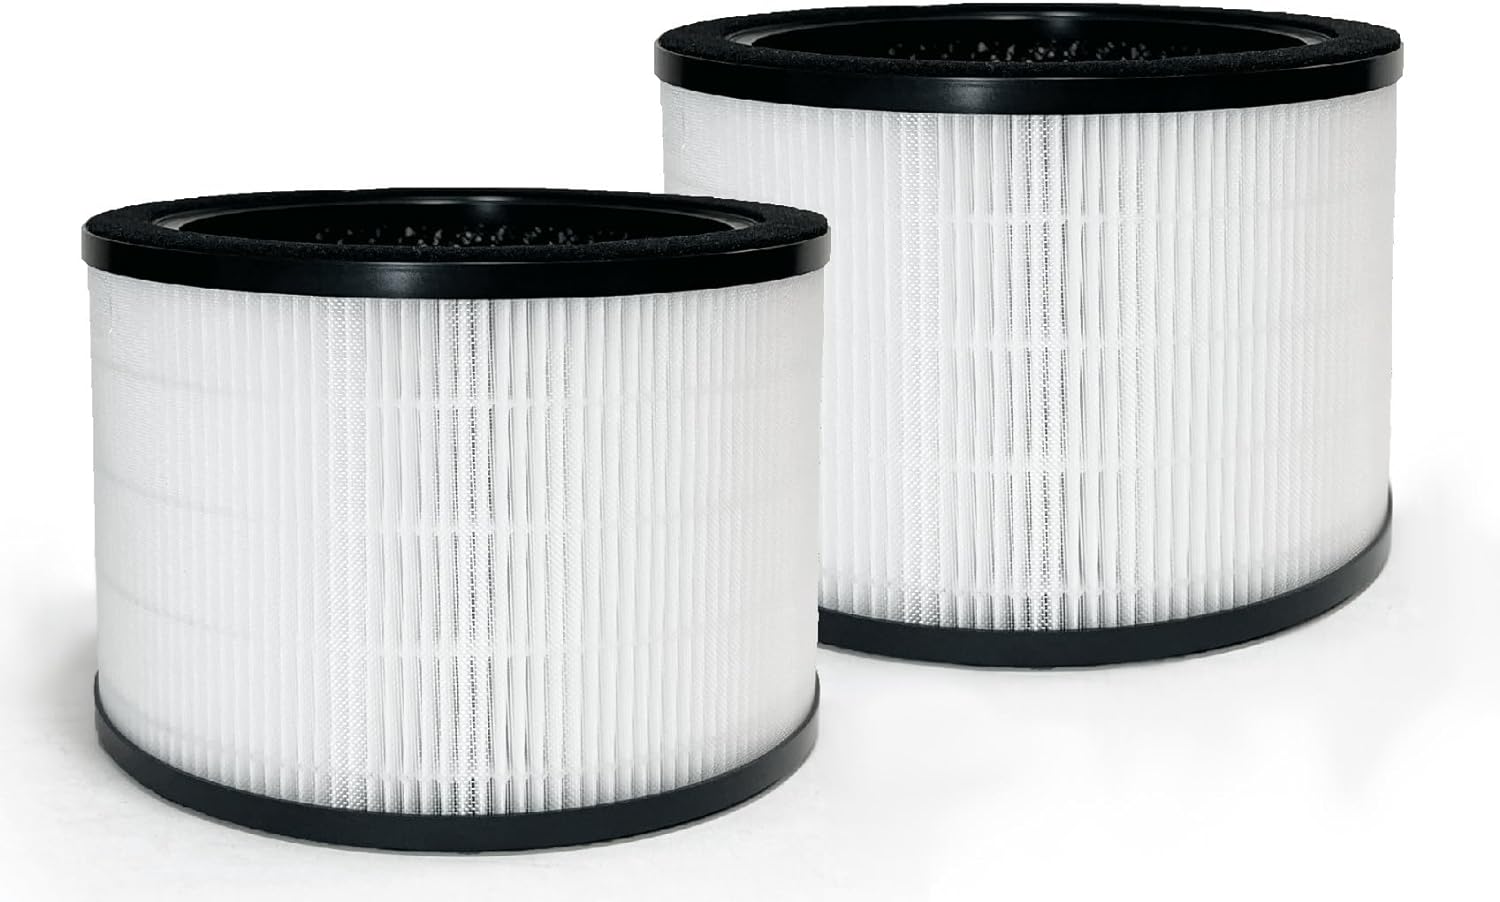 Nispira H7121101 3-In-1 True HEPA Filter Replacement Compatible with Govee Air Purifier H7121 | Removes Smoke, Chemical VOCs, Odor